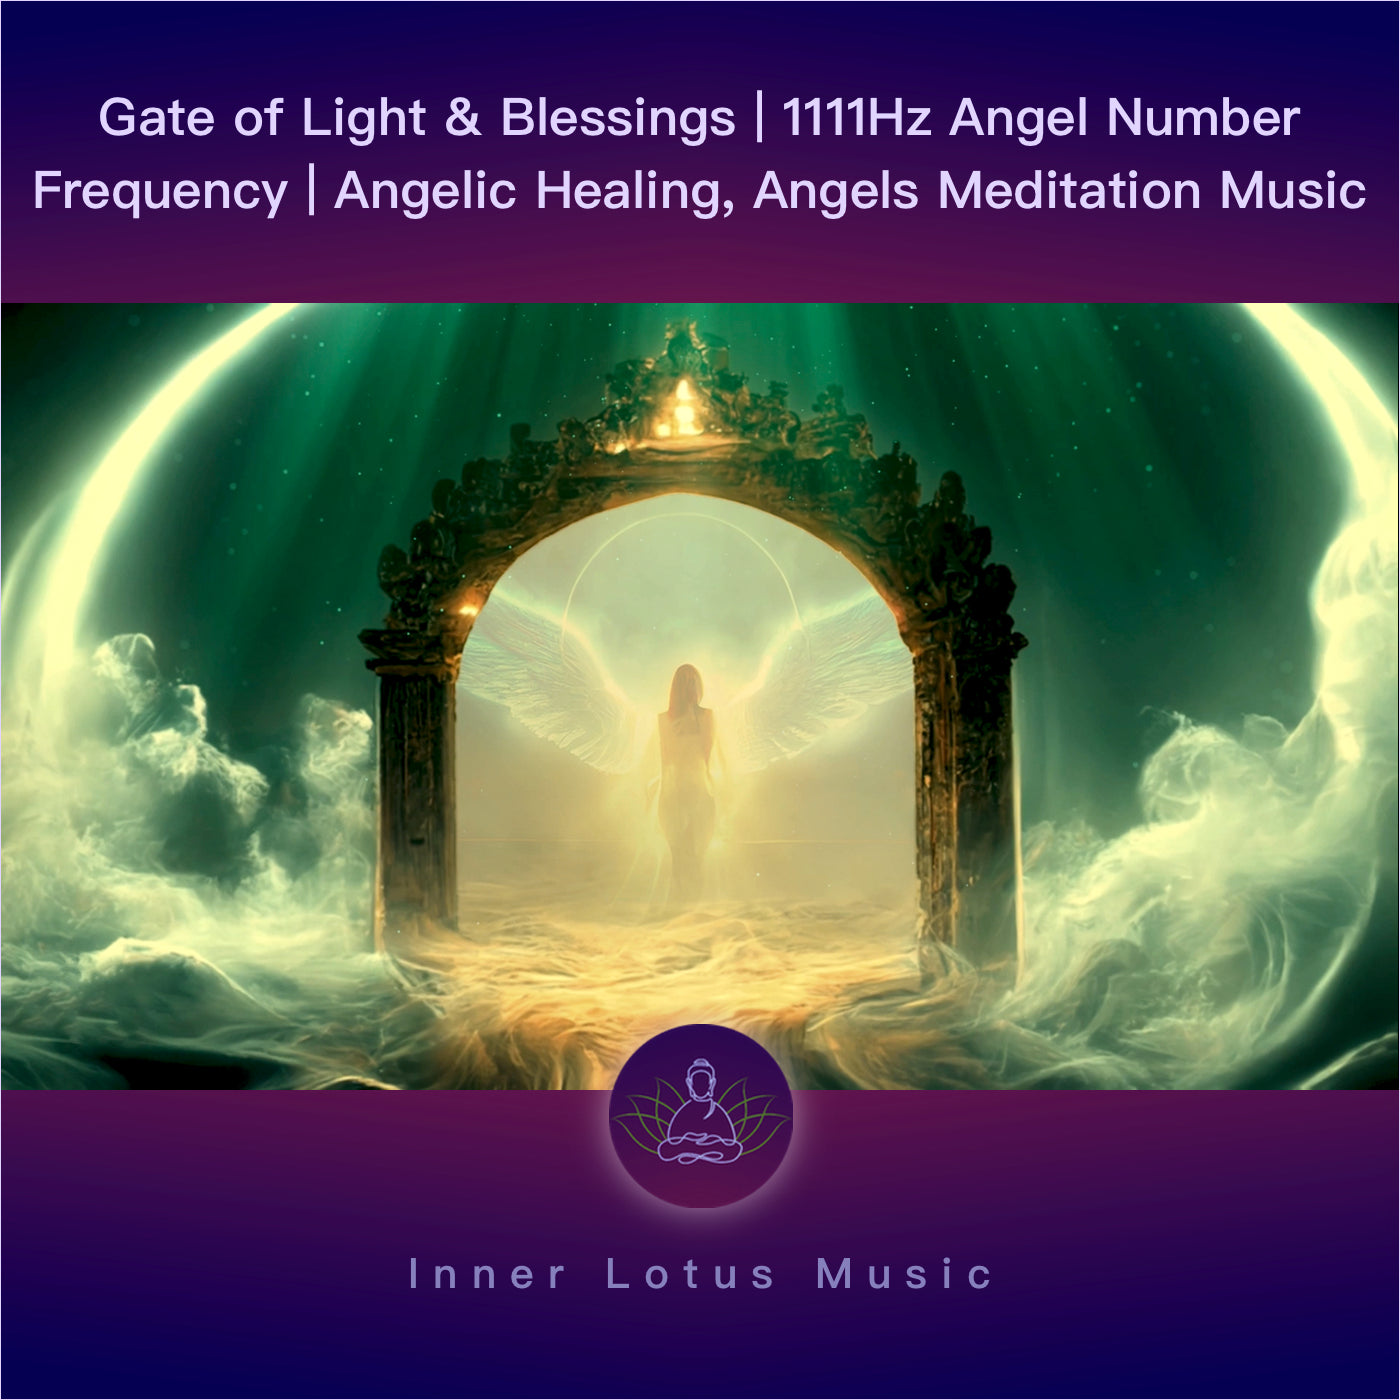 Gate of Light & Blessings | 1111Hz Angel Number Frequency | Angelic Healing, Angels Meditation Music